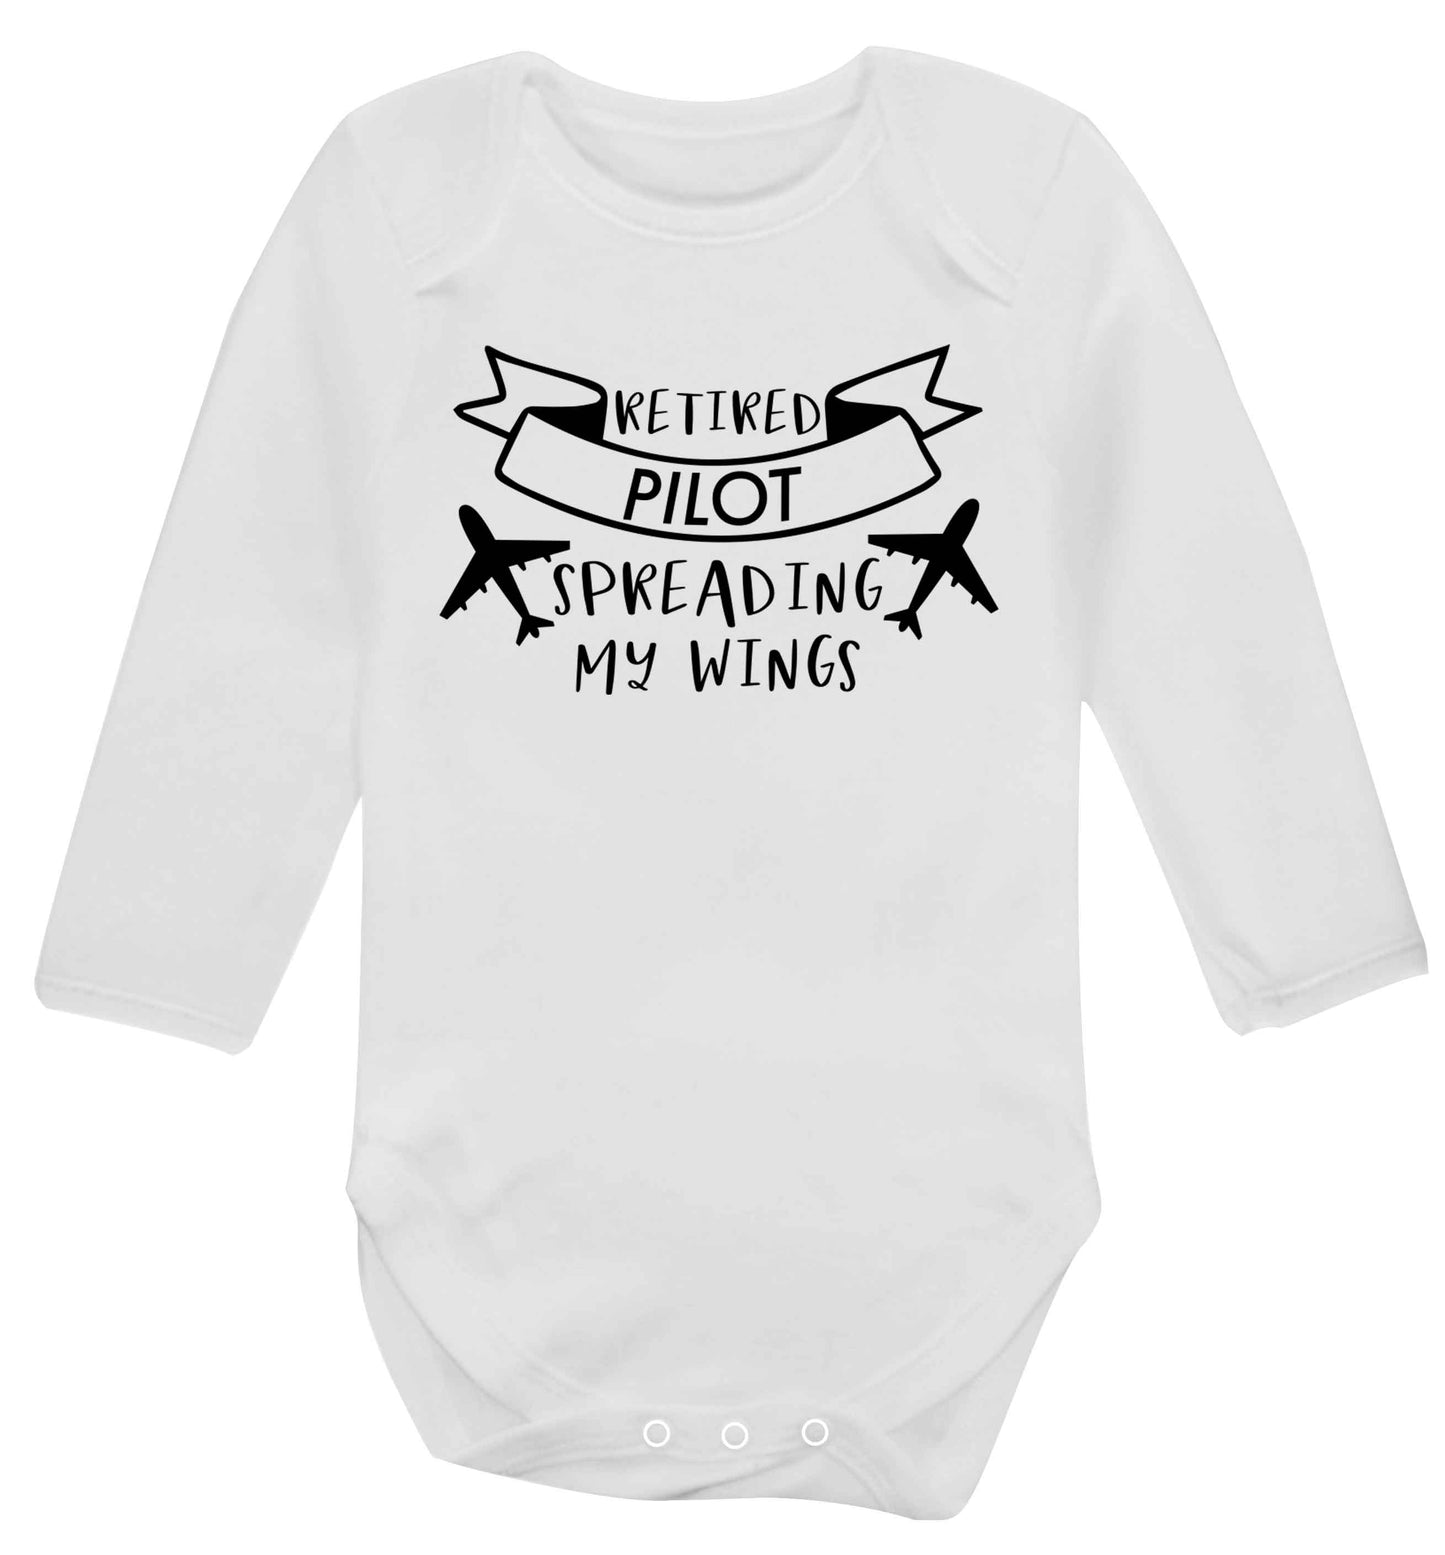 Retired pilot spreading my wings Baby Vest long sleeved white 6-12 months